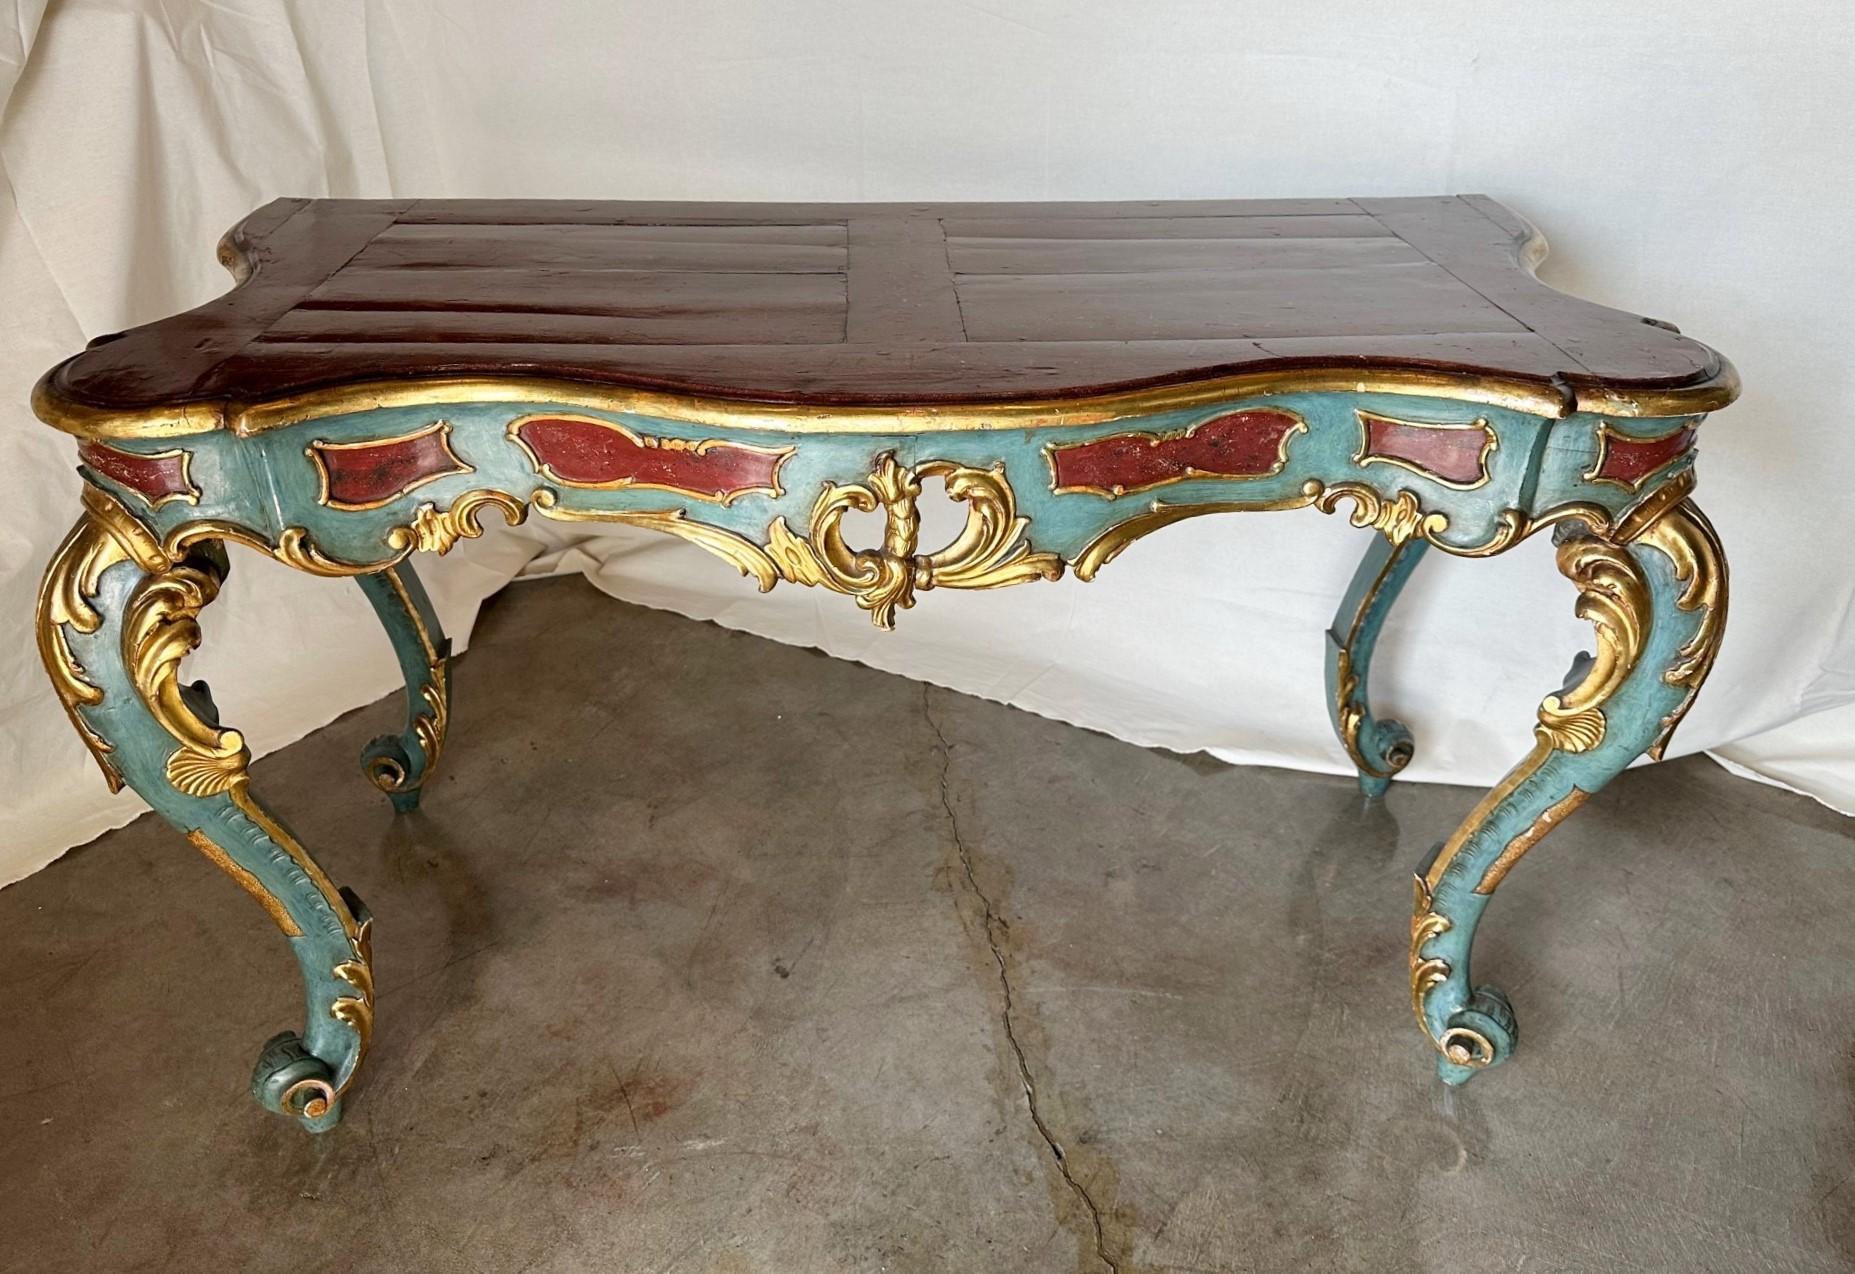 Venetian Rococo Gilt Painted Faux Stone Console Entry Table Office Desk Antique For Sale 4